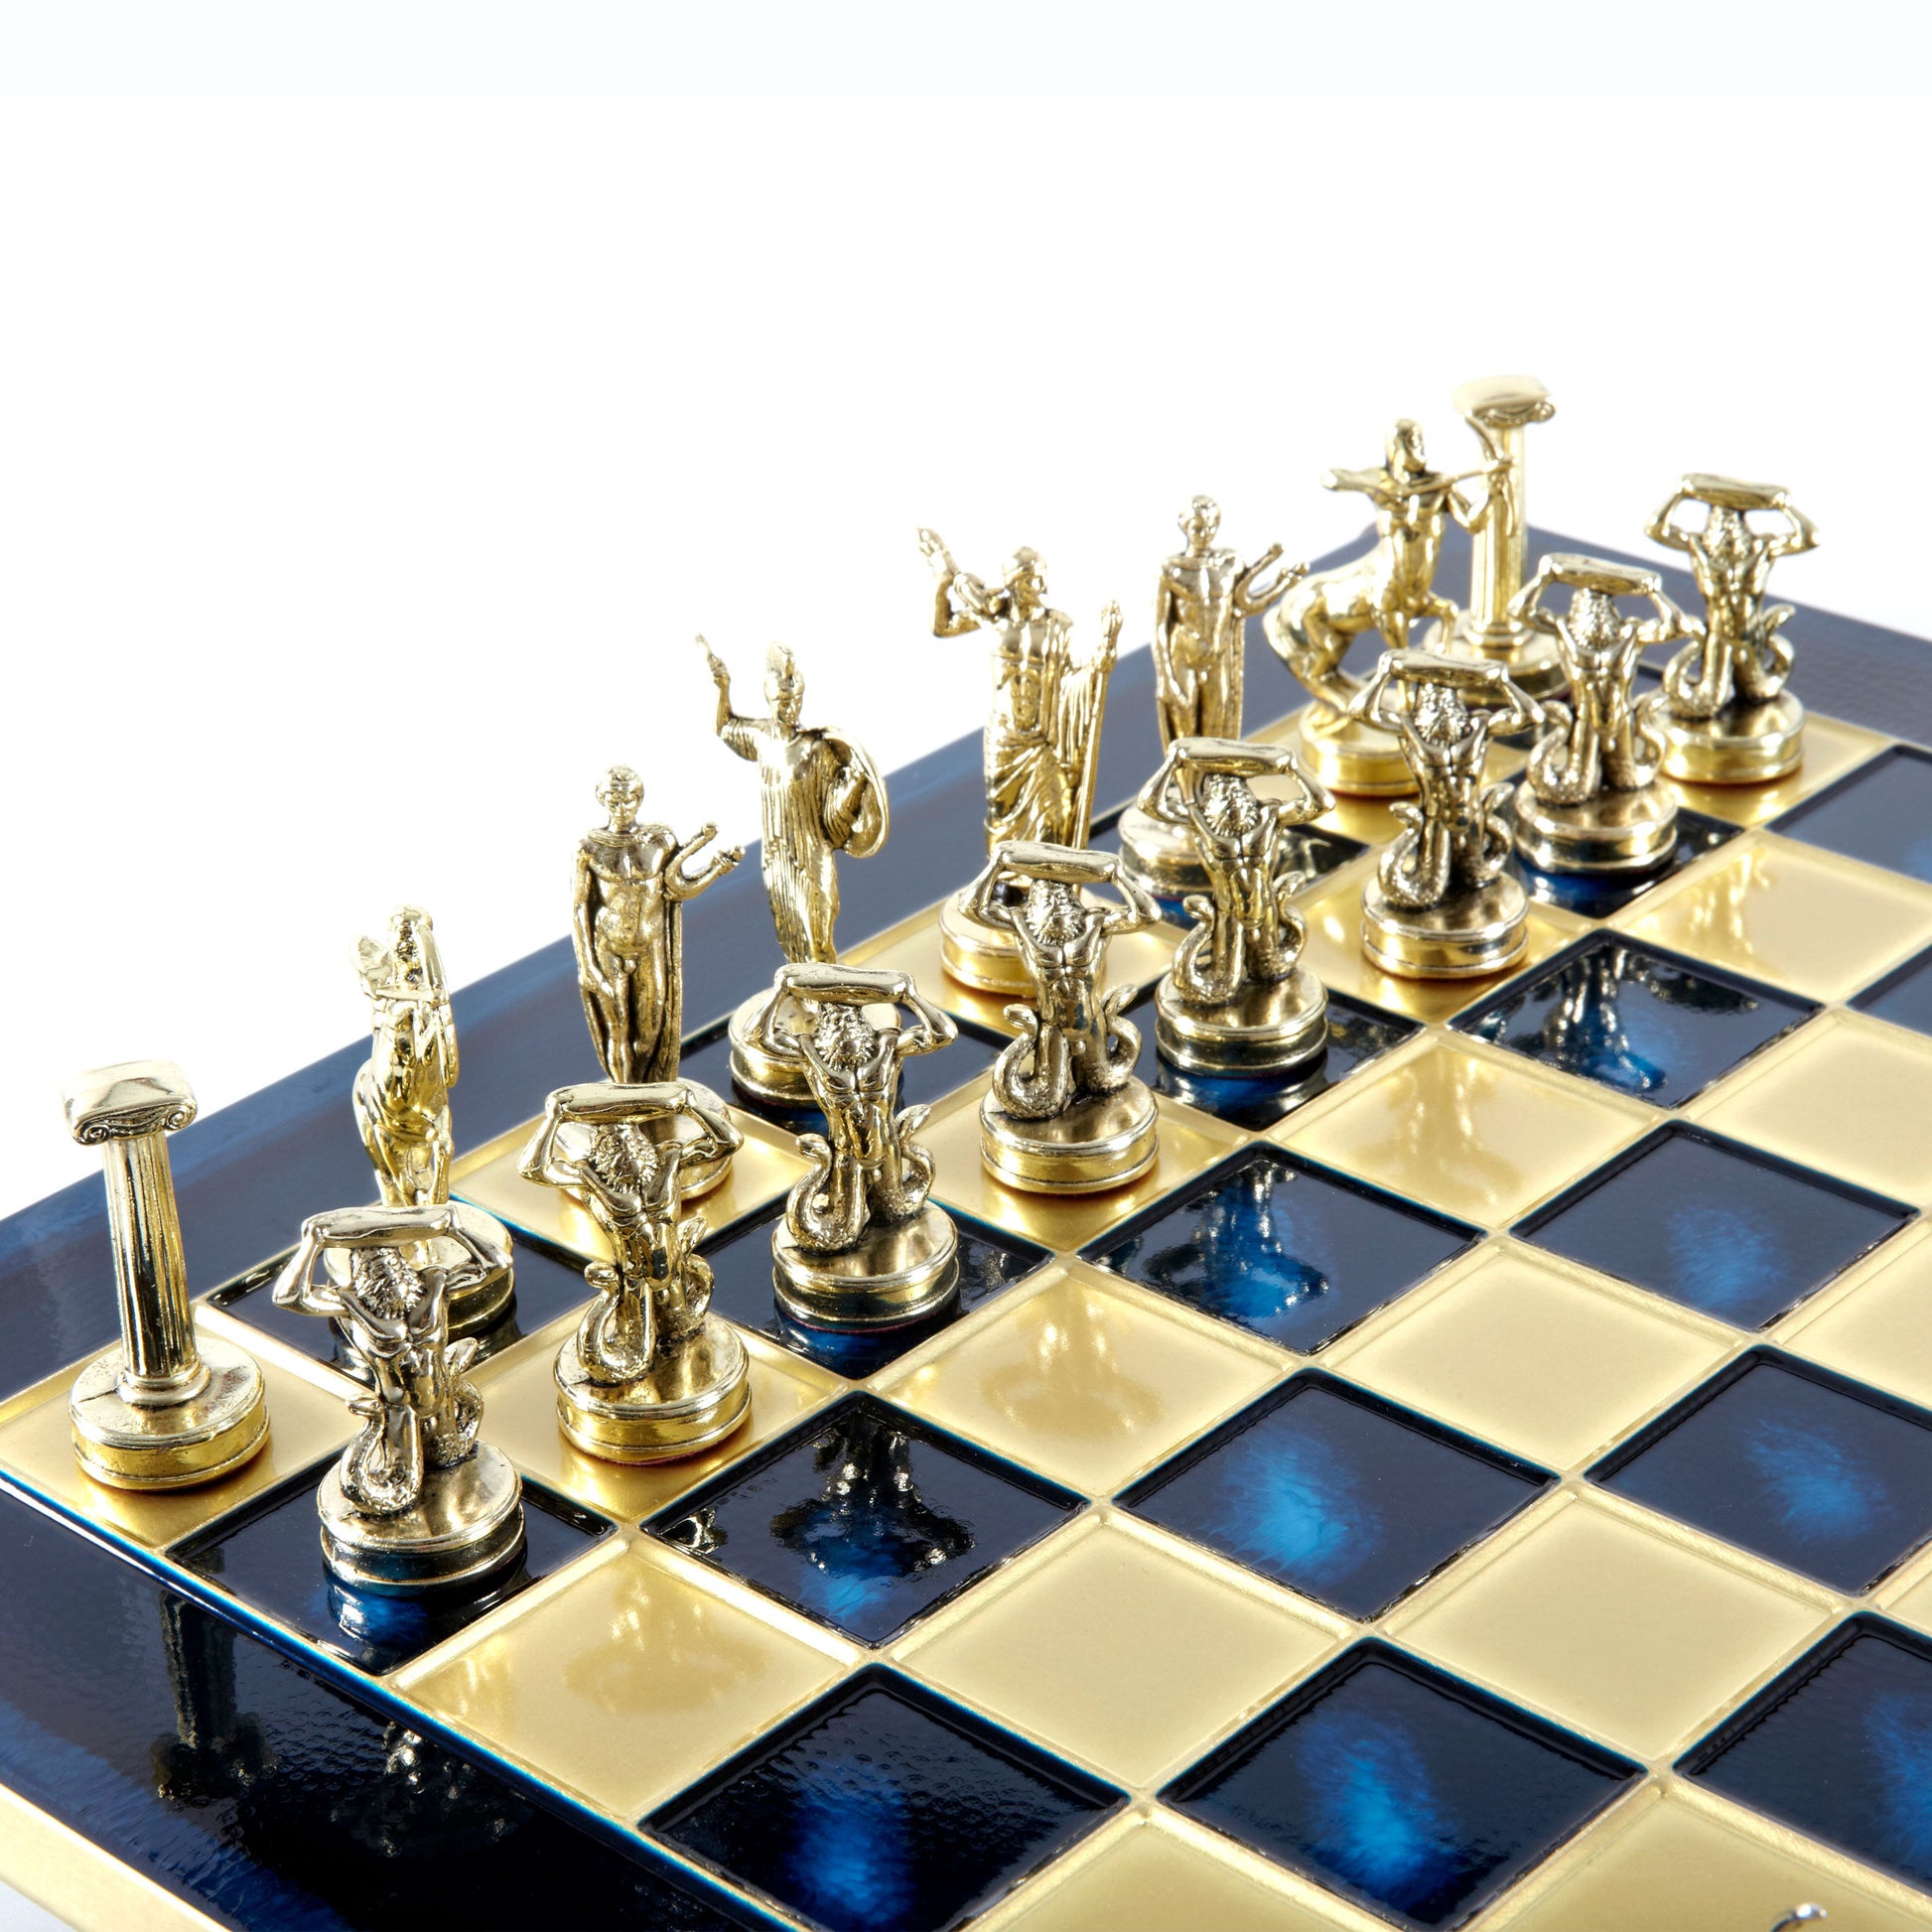 GIANTS' BATTLE CHESS SET with gold/silver chessmen and bronze chessboard 36 x 36cm (Medium) - Premium Chess from MANOPOULOS Chess & Backgammon - Just €210! Shop now at MANOPOULOS Chess & Backgammon